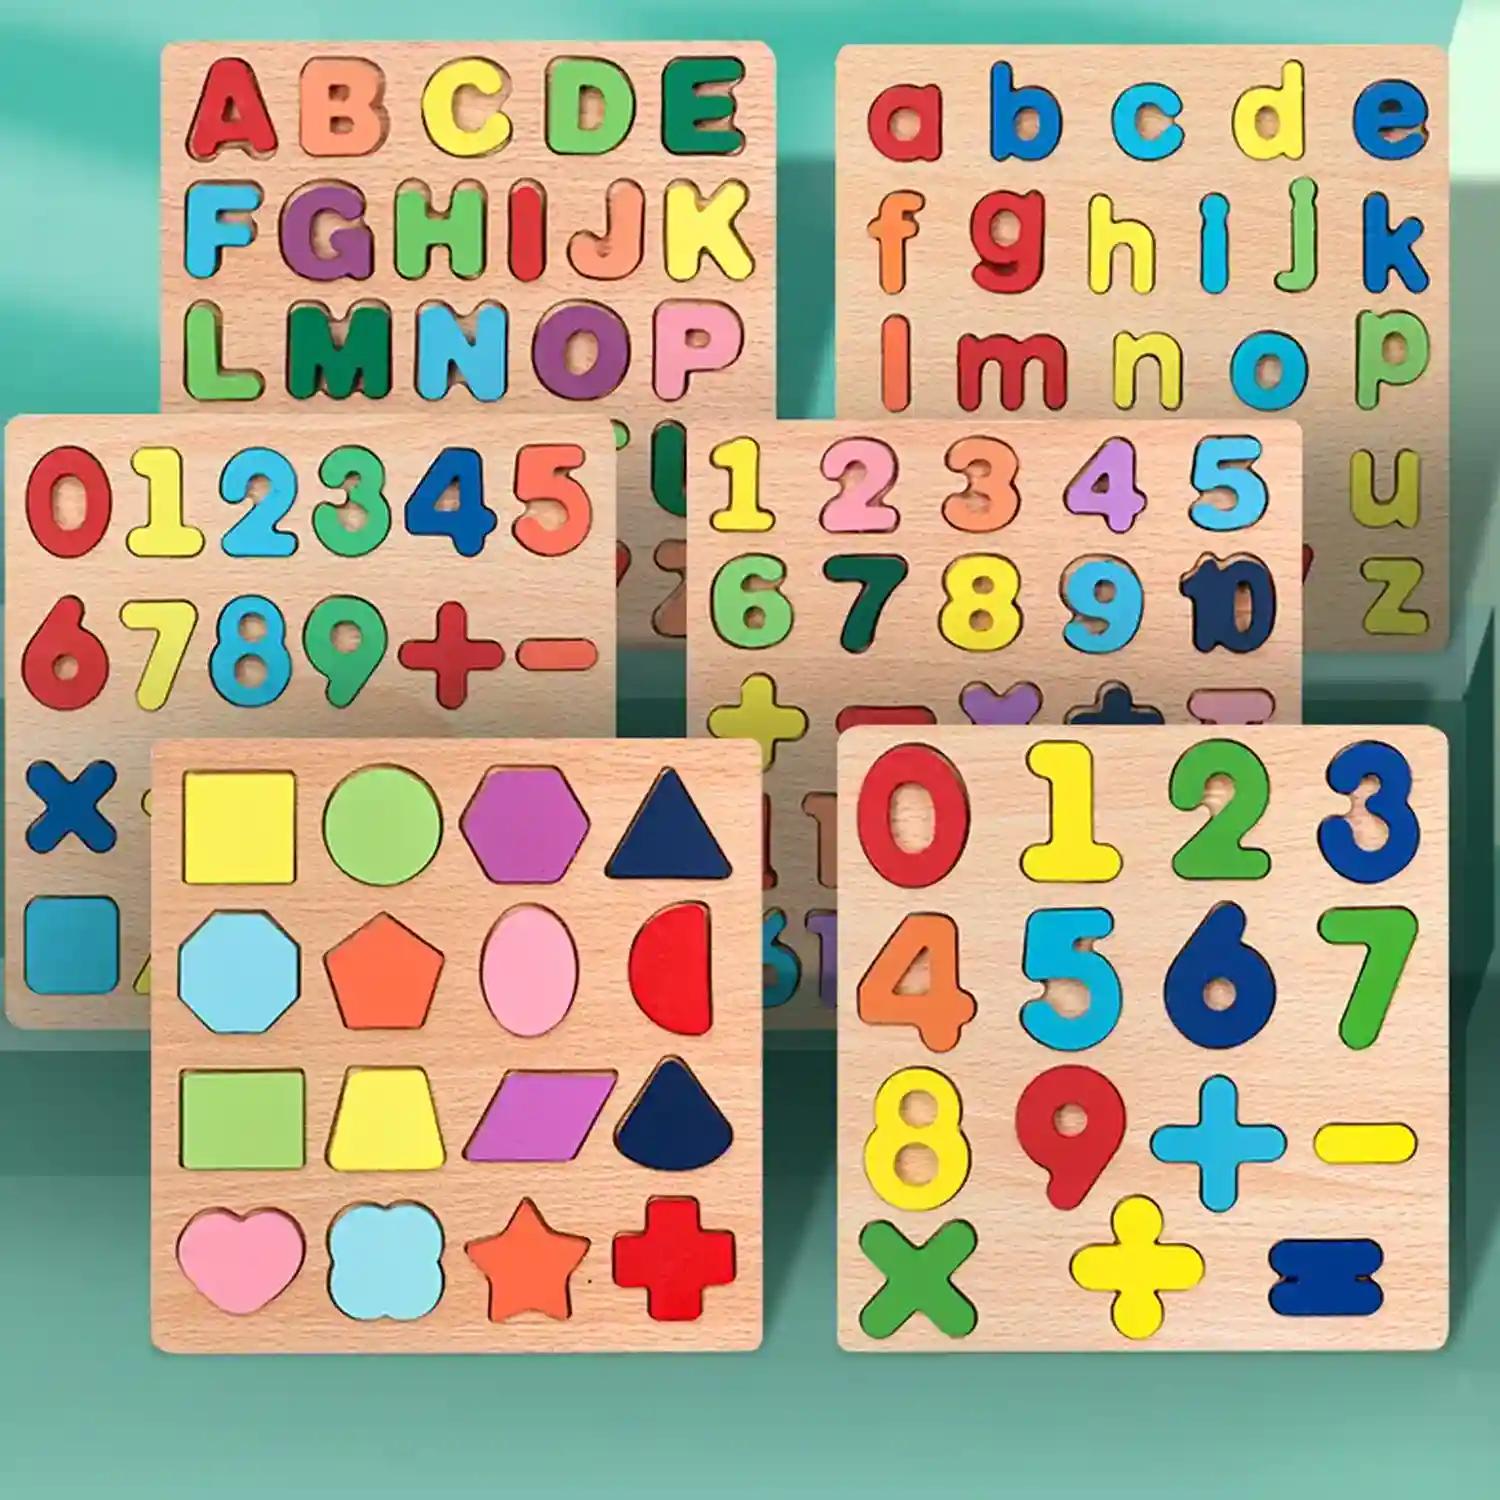 Hand Scraping Board Puzzle Number Alphabet Cognitive Early Education Toy Puzzle Wooden Alpha Numeric & Shapes Puzzles Learning Tool For Preschoolers A To Z, 1 To 20 & Shapes (Pack Of 6)